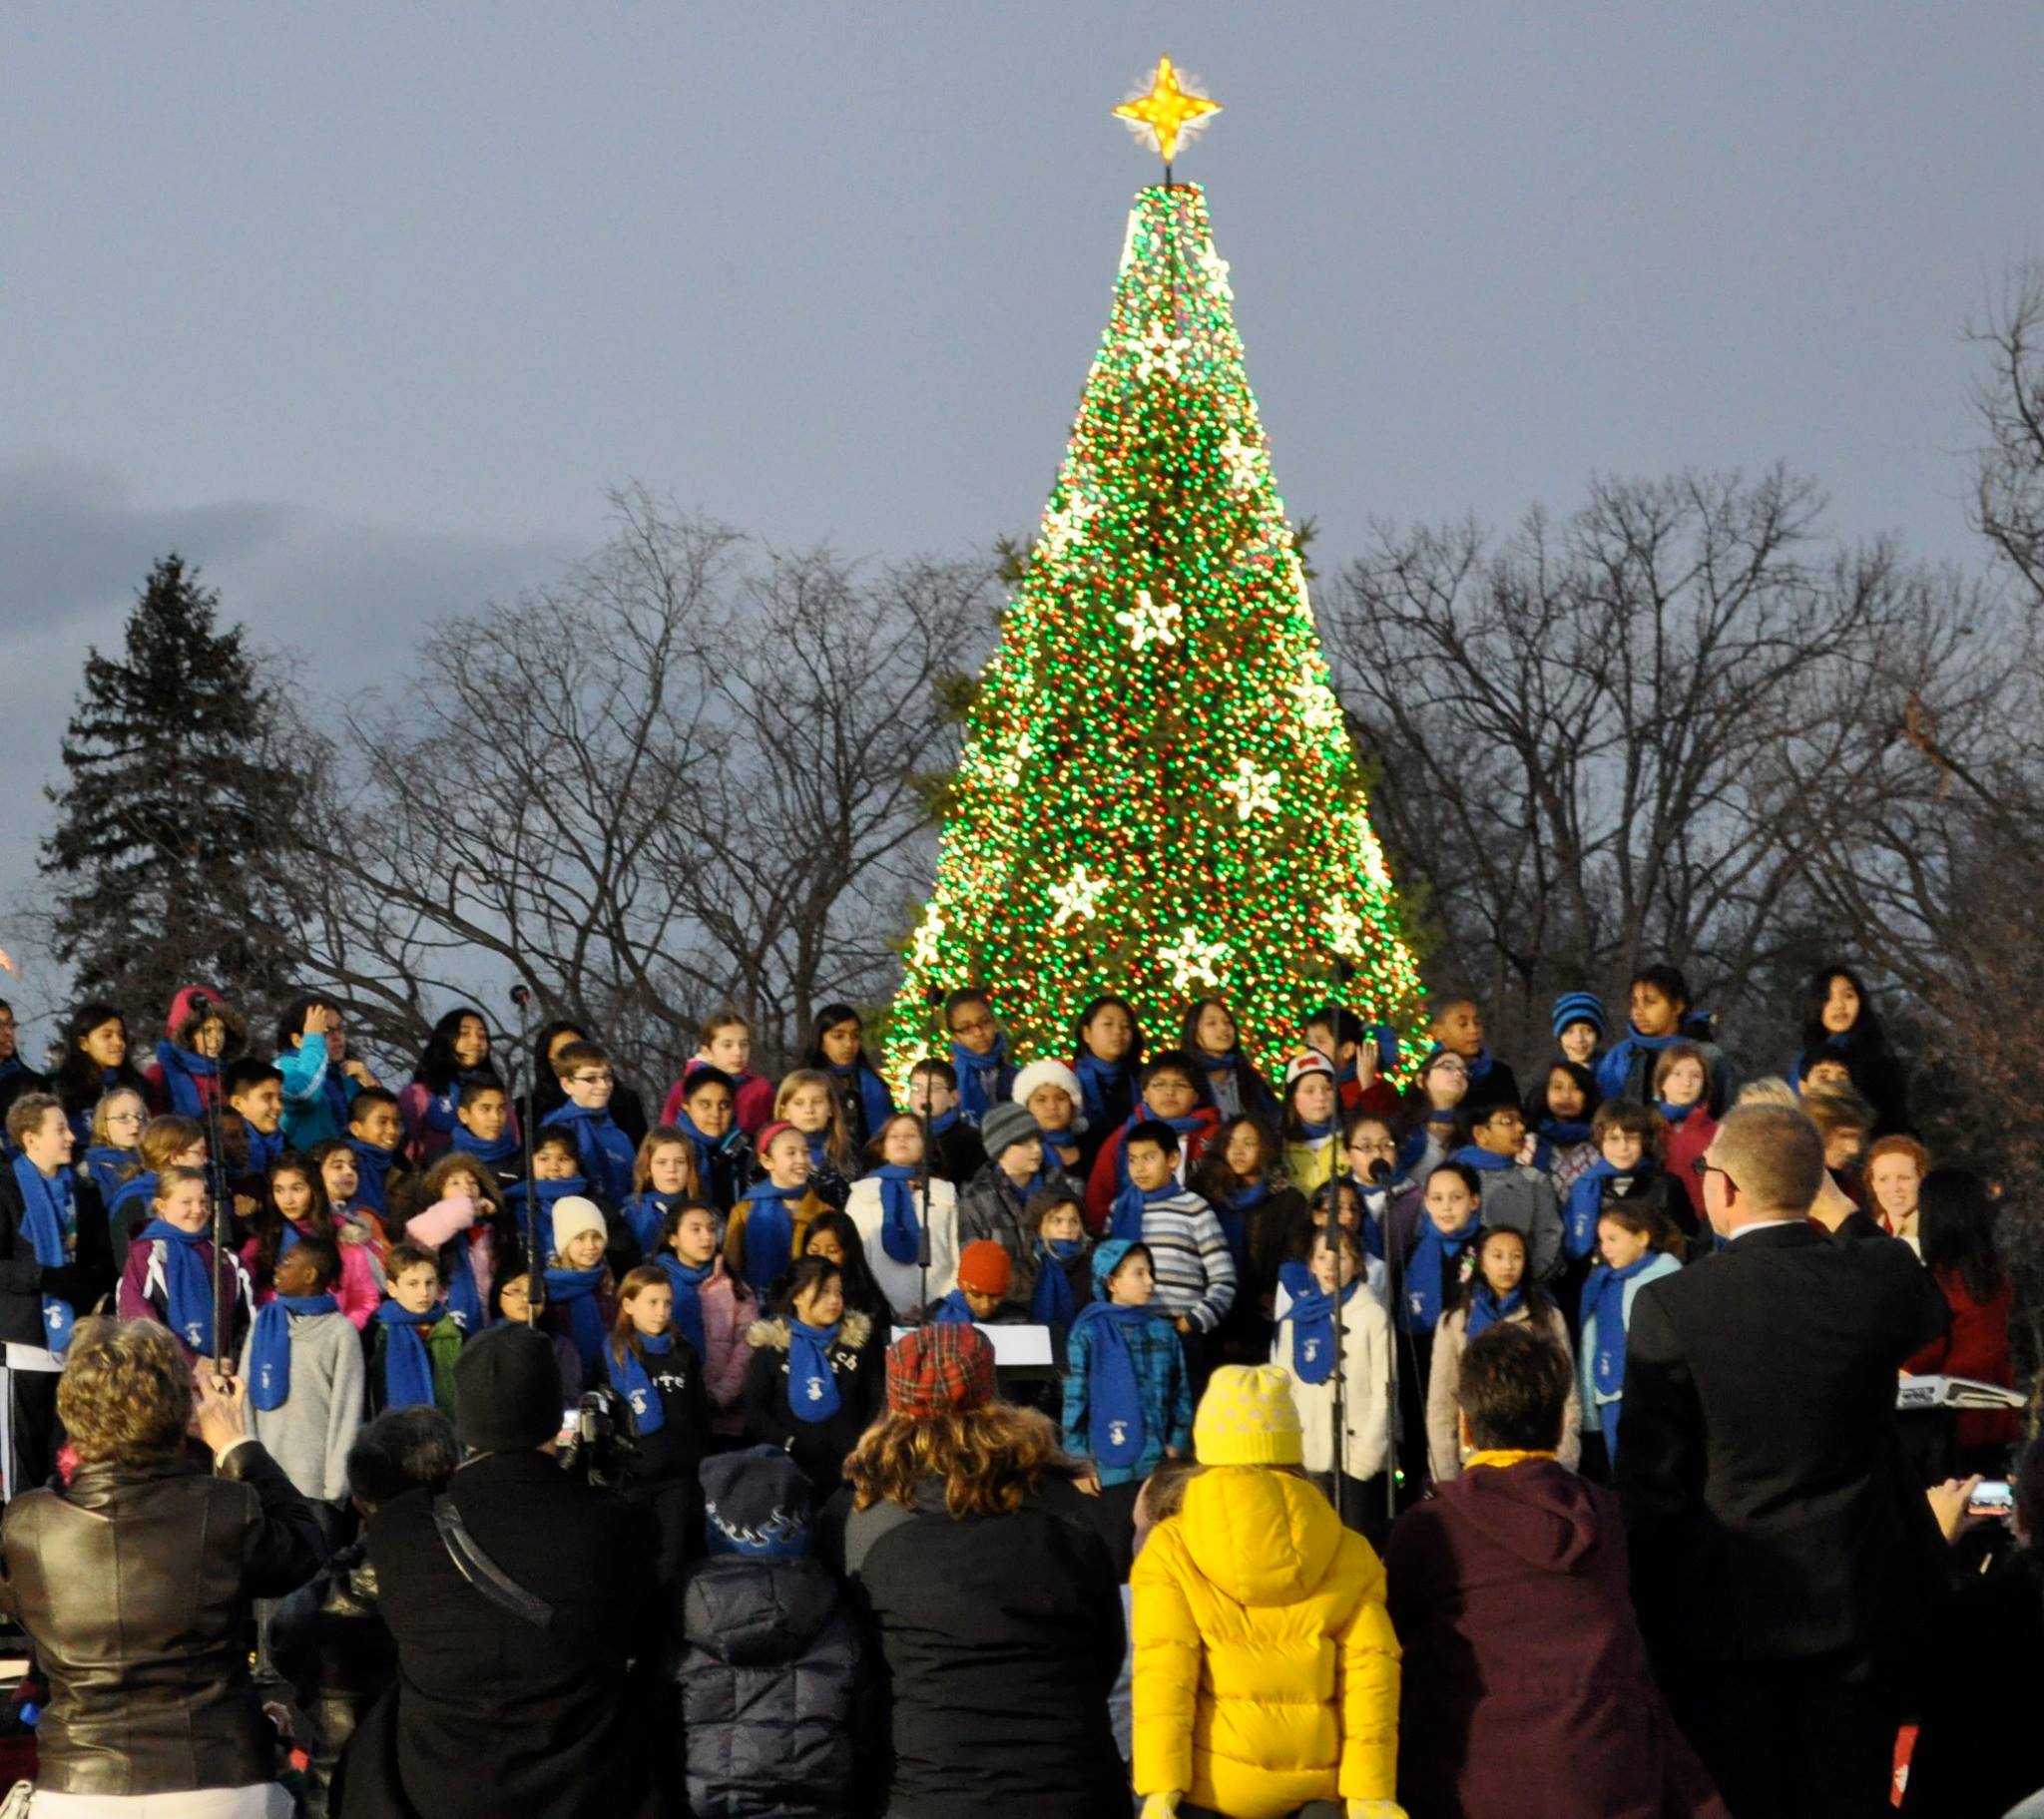 A choir sings in front of the National Christmas Tree, during the 2013 music program, while visitors take pictures